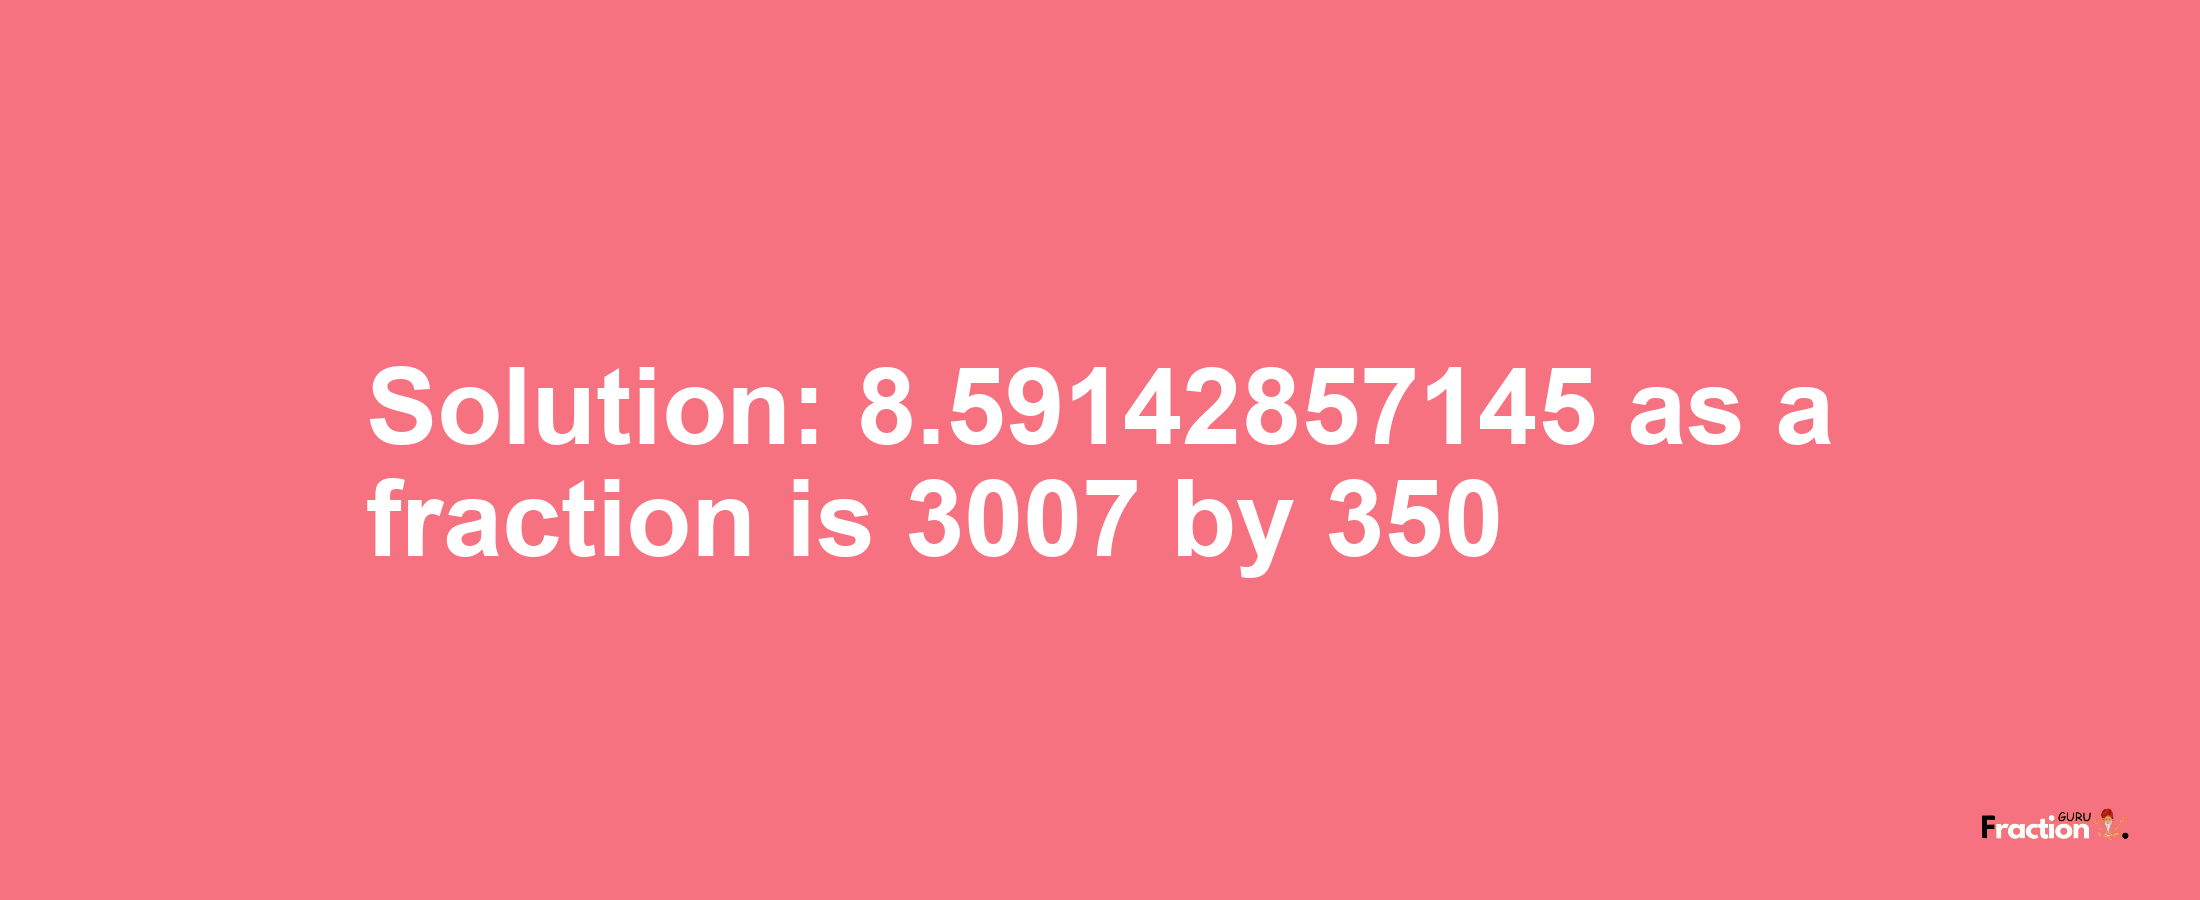 Solution:8.59142857145 as a fraction is 3007/350